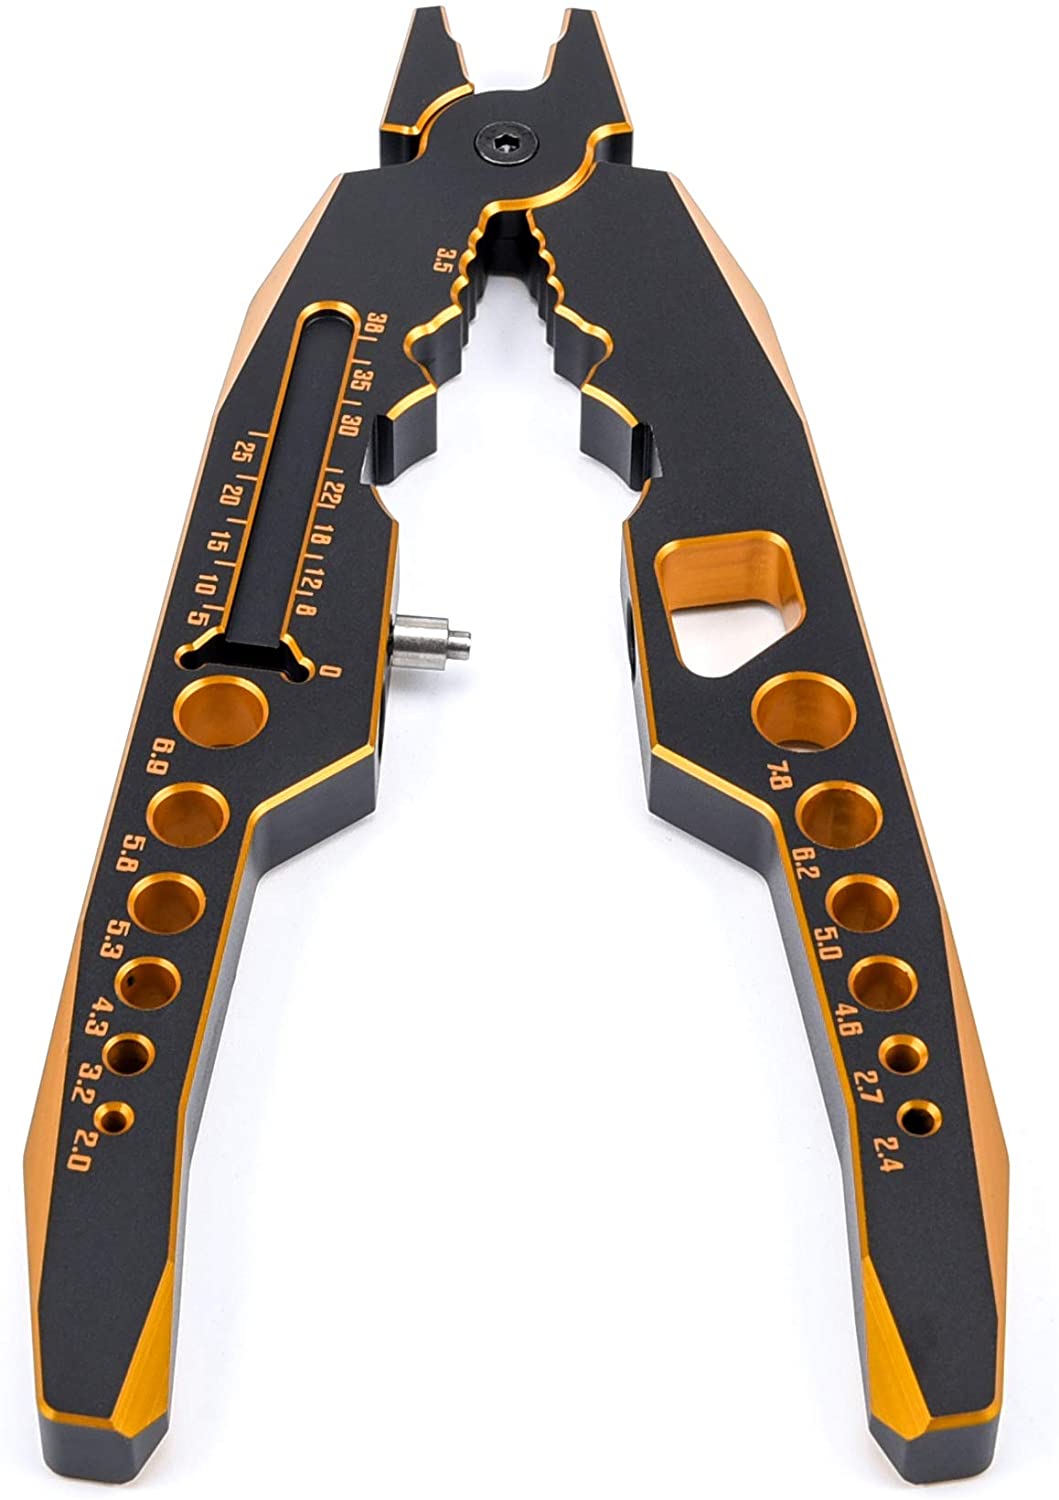 Multifunctional Pliers Shock Absorber For 1/10 1/8 RC Car in Golden